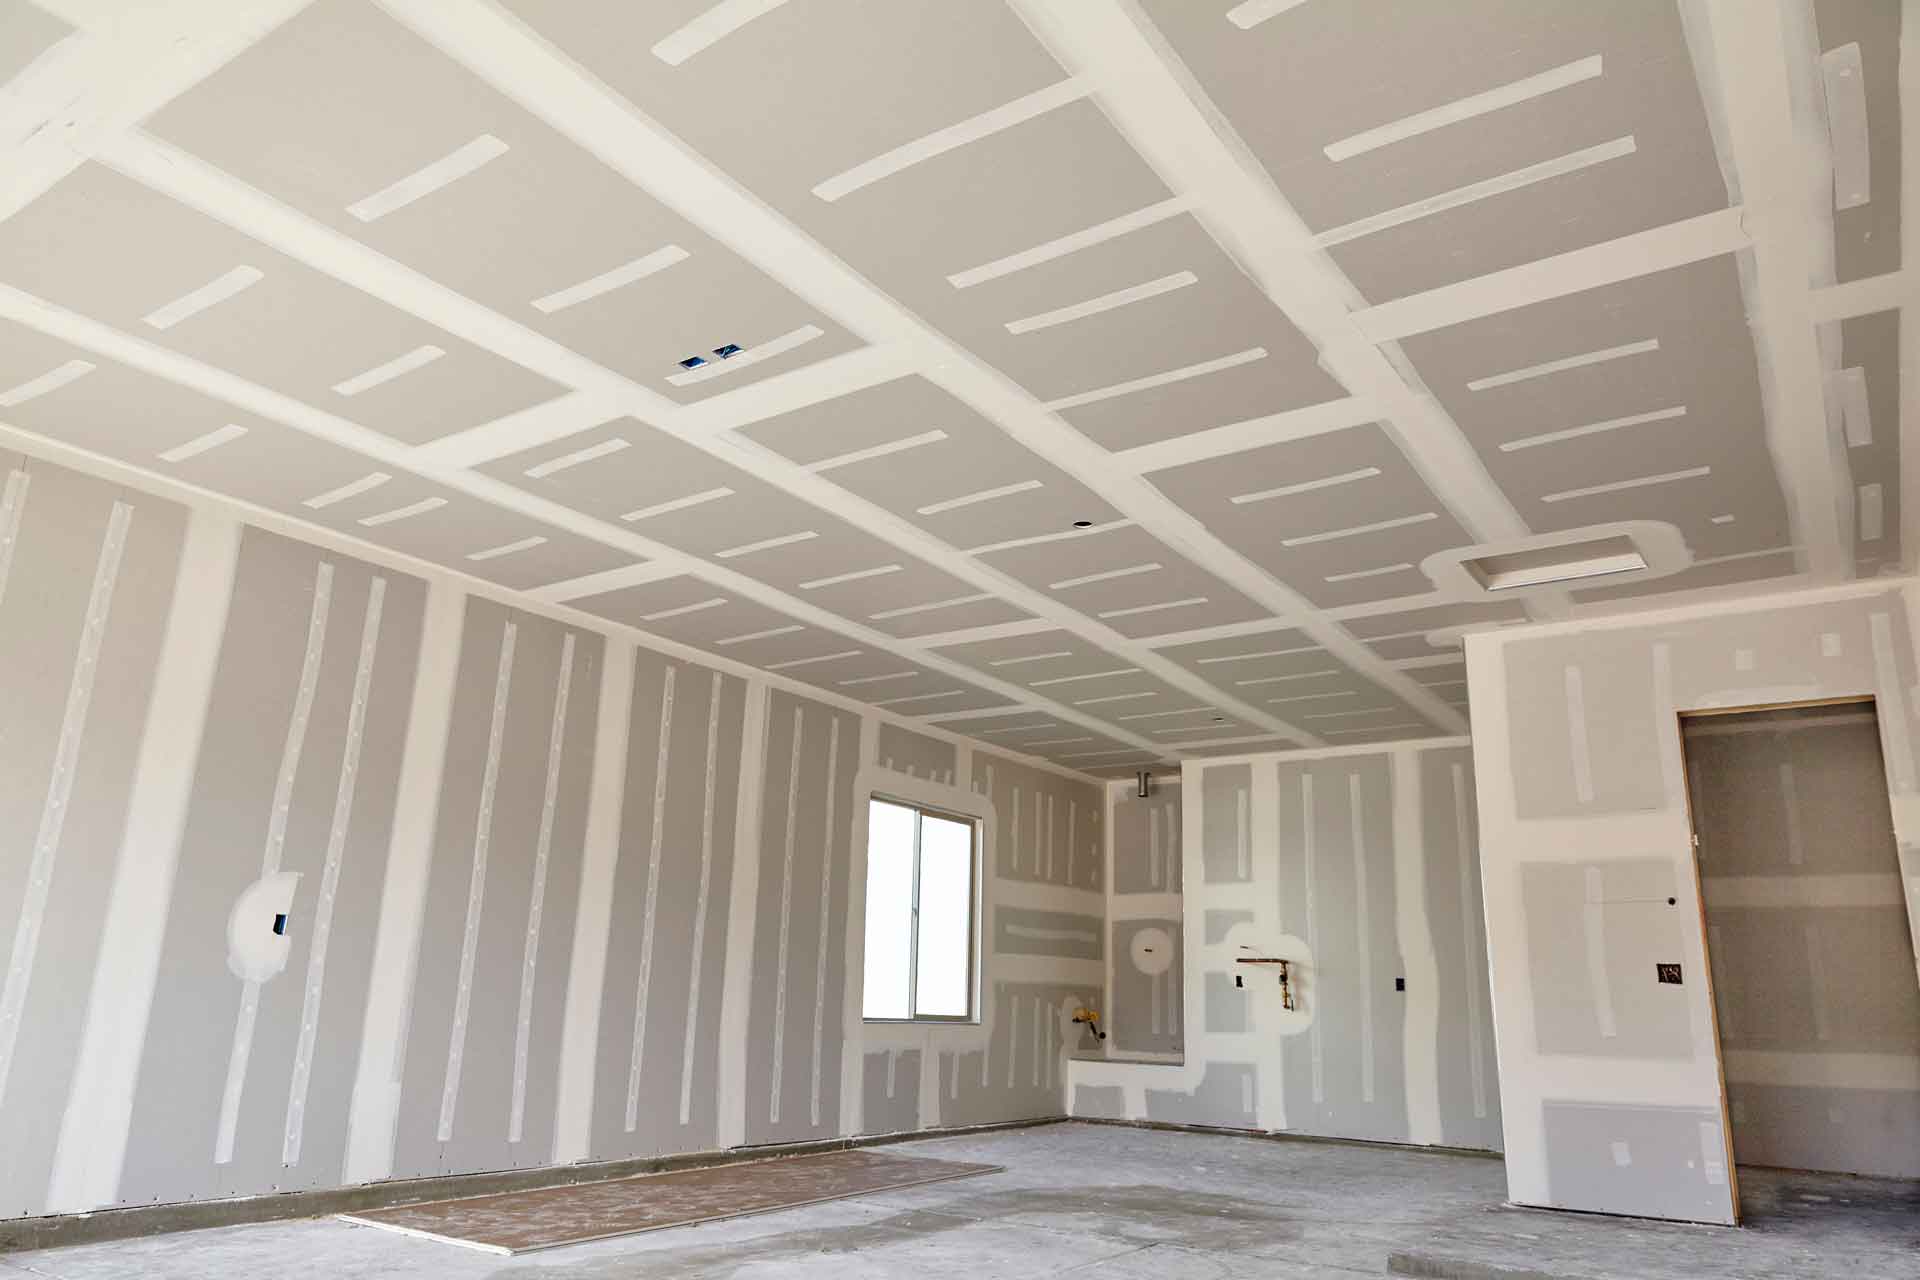 A large room with newly-installed drywall, not yet painted